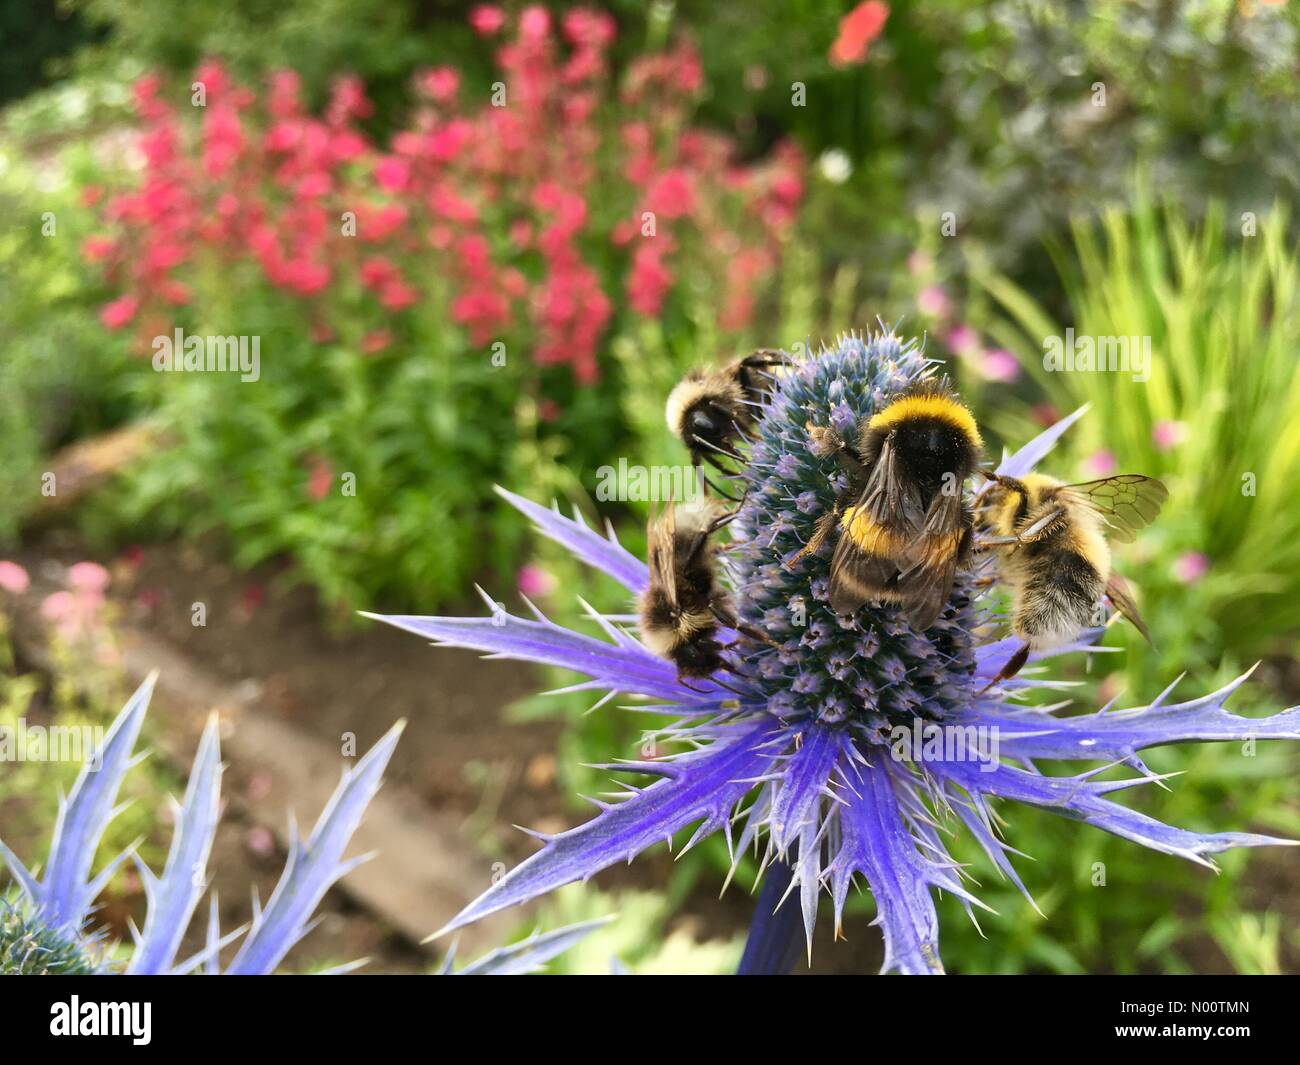 UK weather sunny day at Golden Acre Park in Leeds. 19th July 2018 Flowers were in full bloom at Golden Acre Park, these bees were pollinating a sea holly flower. Stock Photo